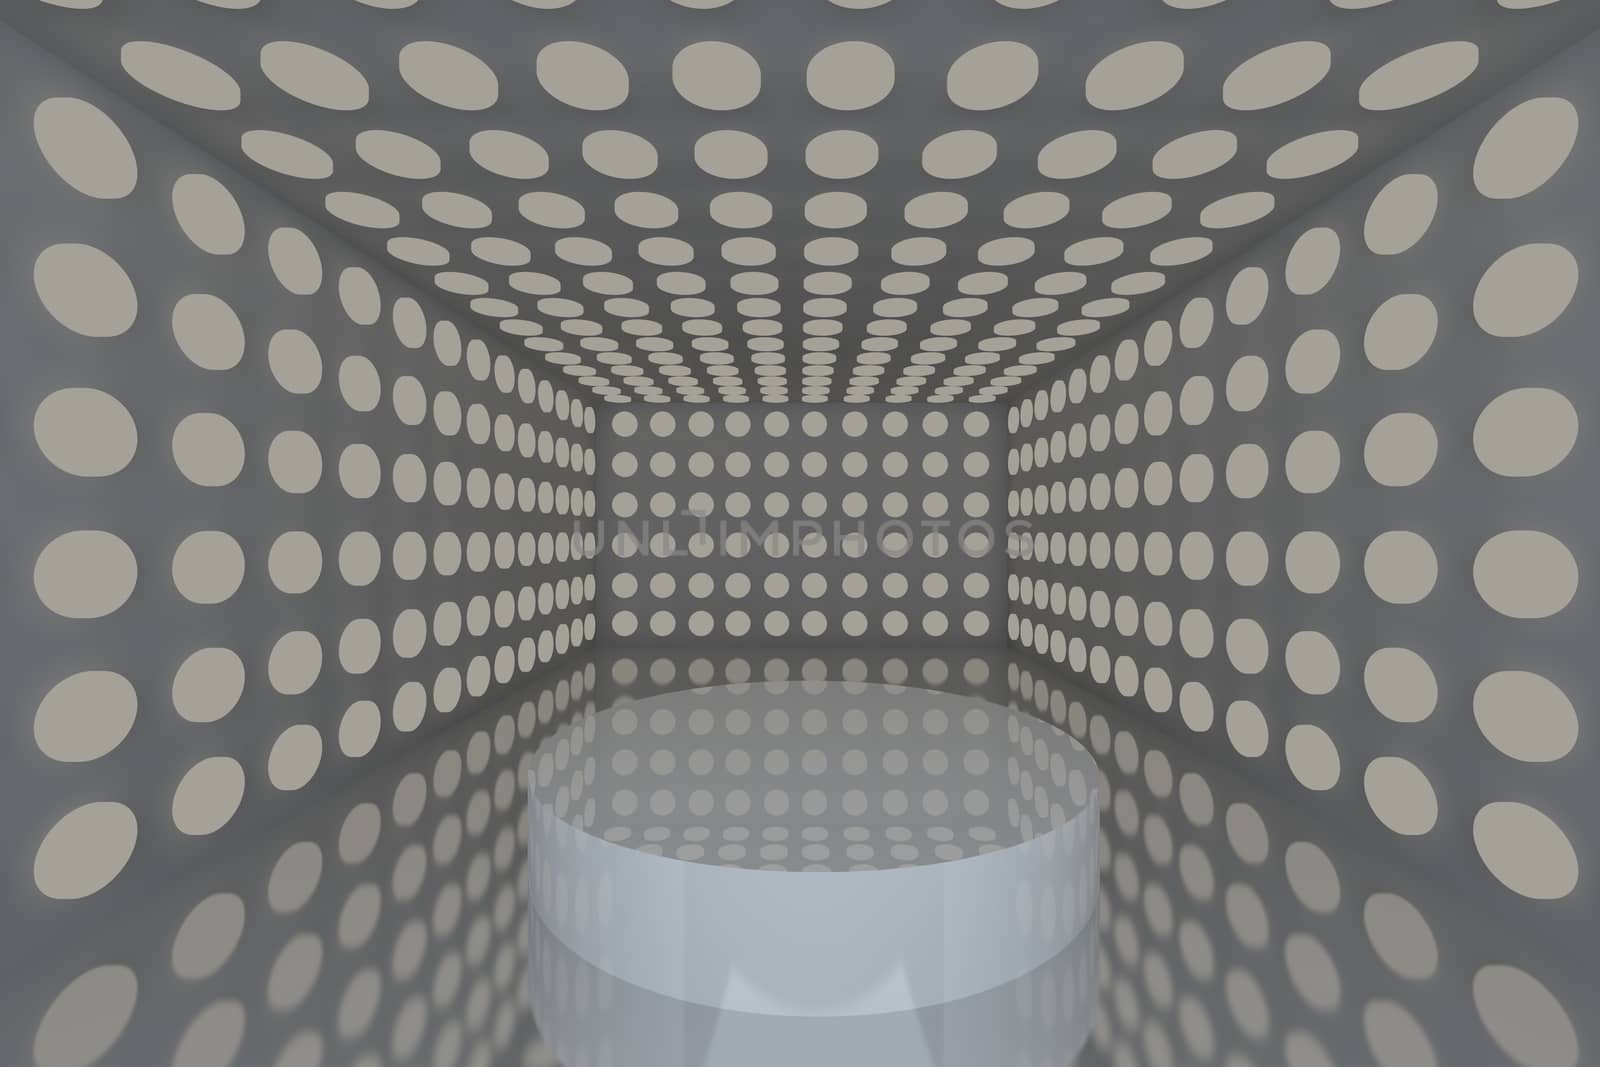 Podium in Empty room with abstract color gray lighting sphere wall and gray wall 